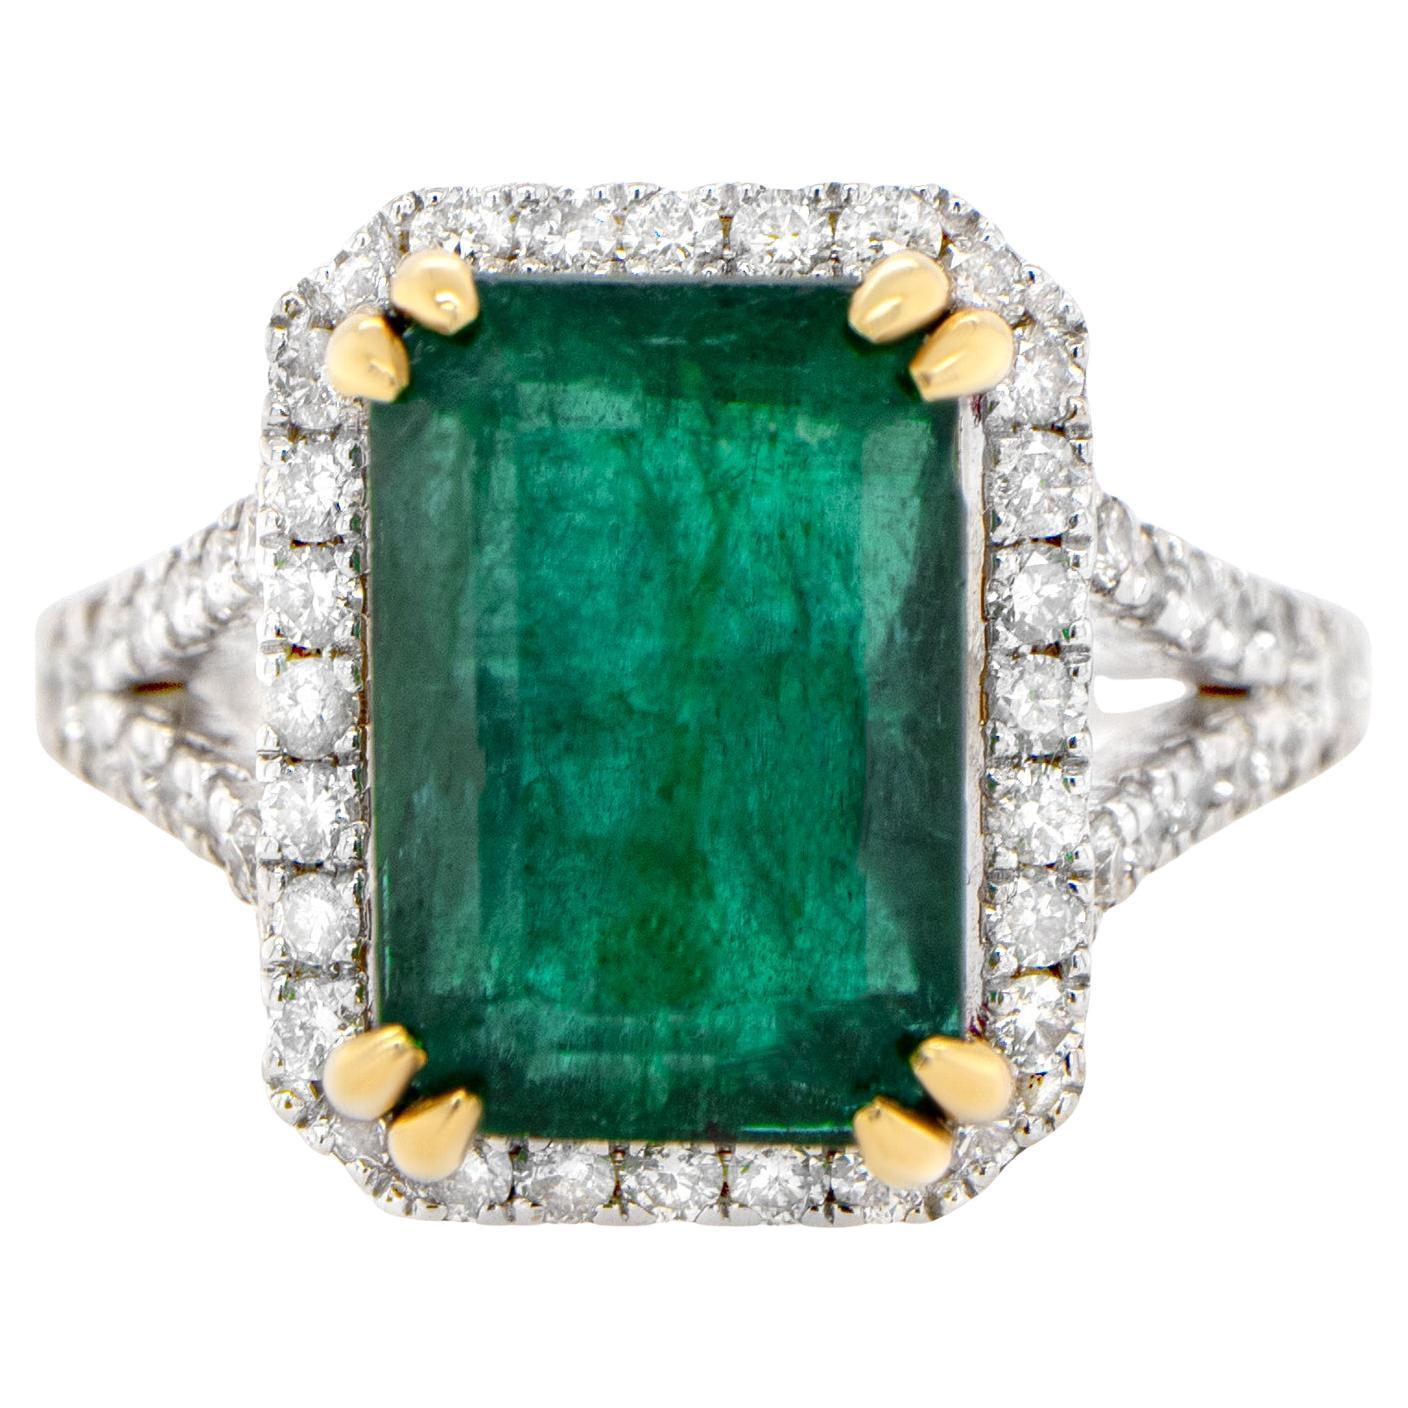 Emerald Ring With Diamond Setting 7.18 Carats 18K Gold